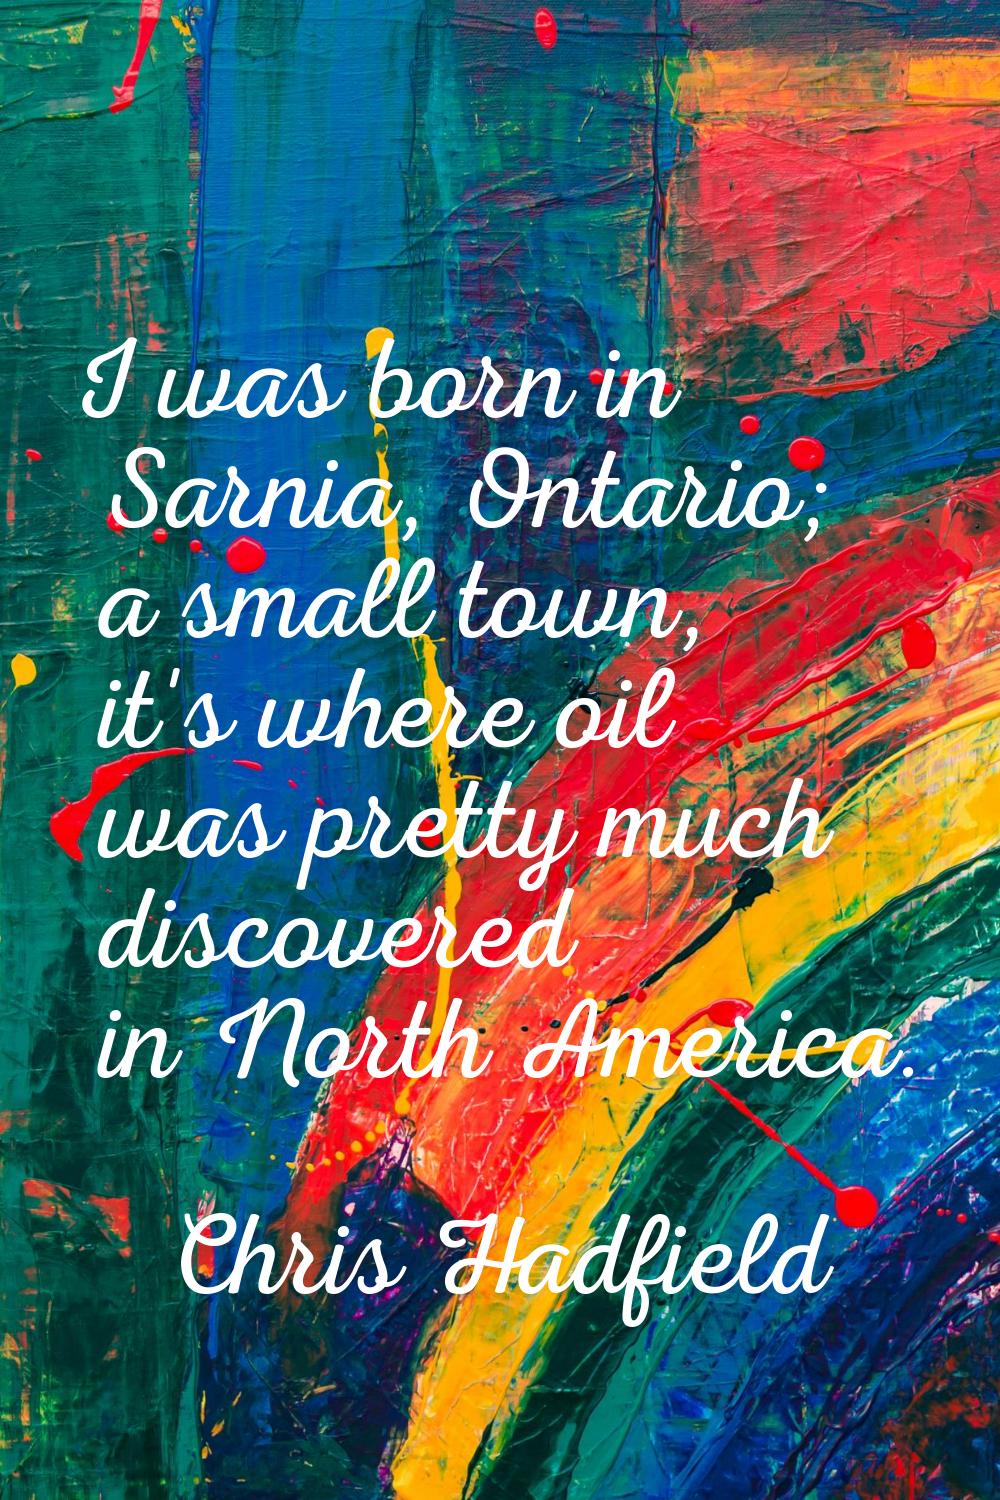 I was born in Sarnia, Ontario; a small town, it's where oil was pretty much discovered in North Ame